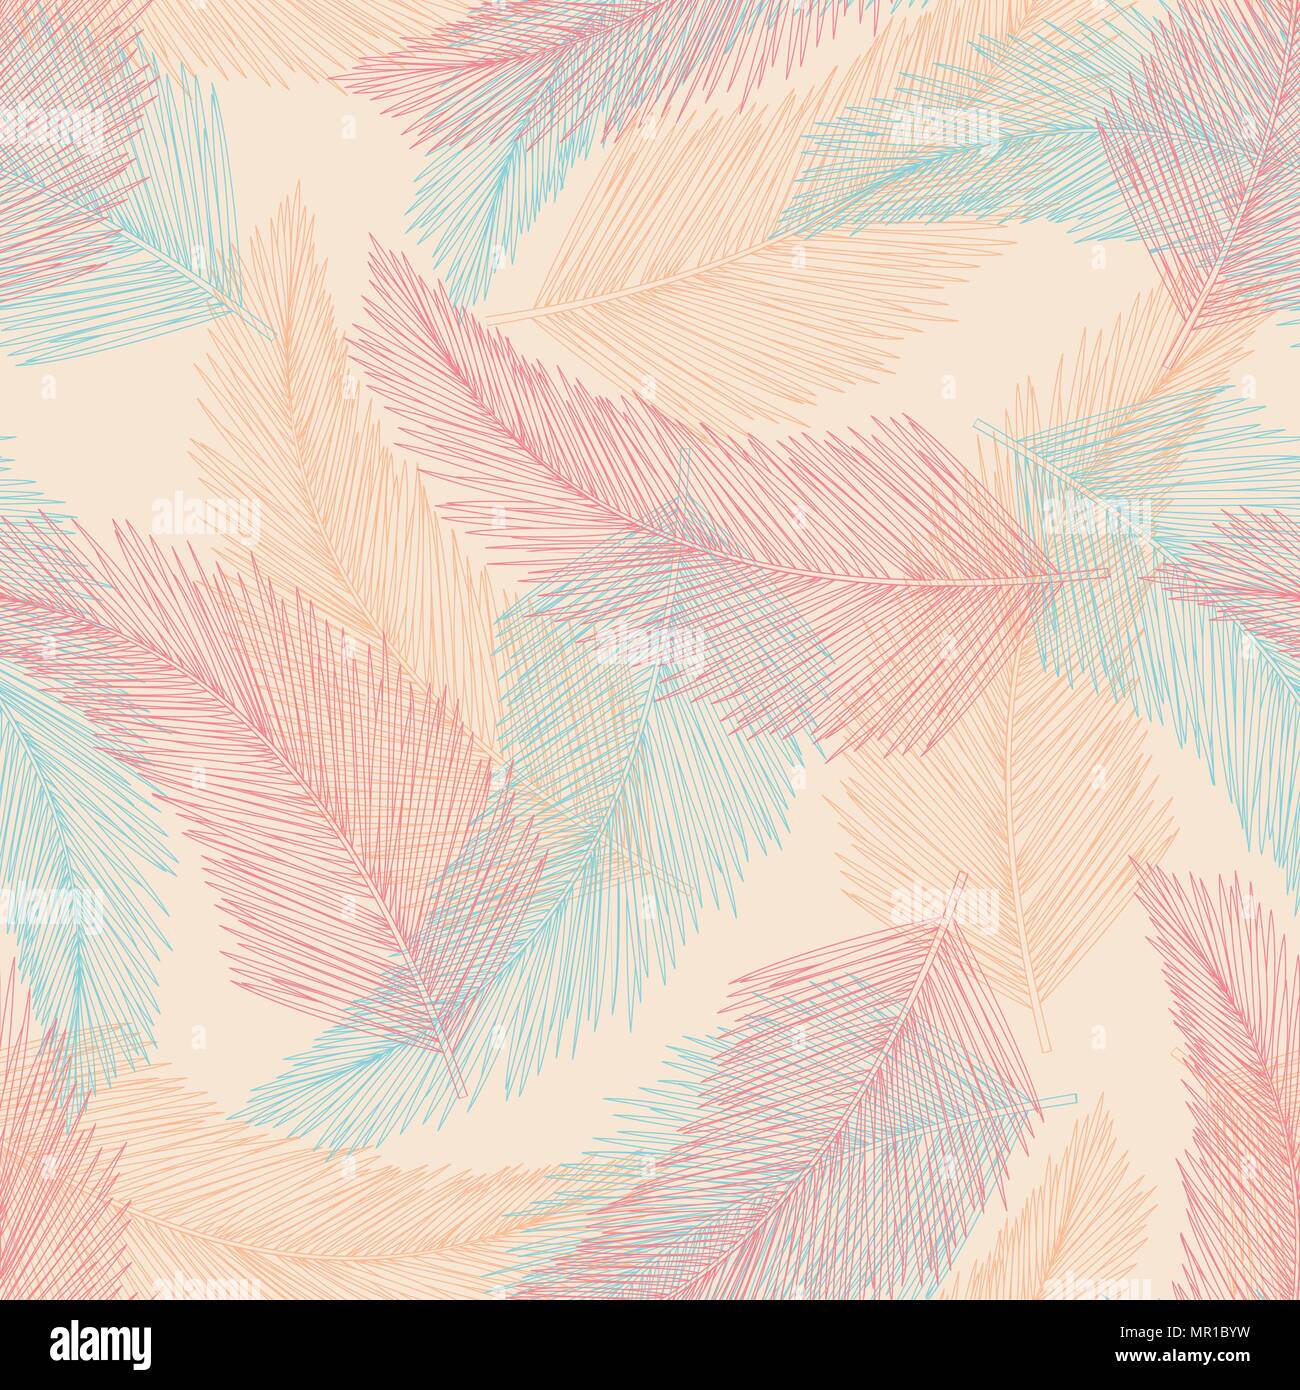 Coconut leaves in red, orange and blue color random on pastel background. Seamless pattern background design for Summer season in vector illustration. Stock Vector